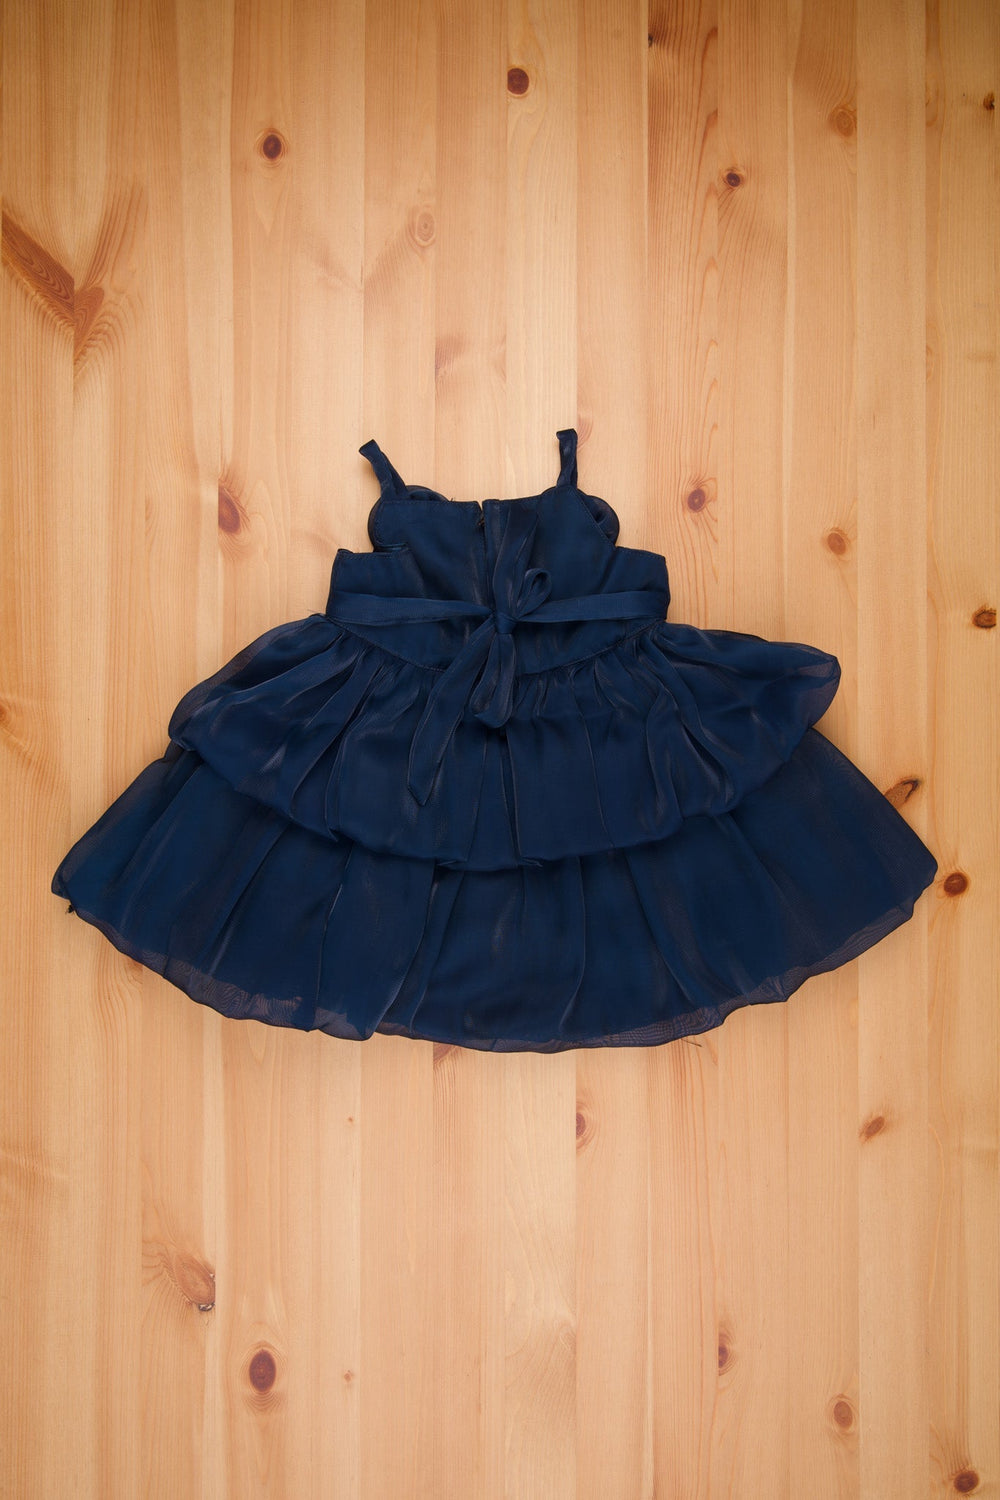 The Nesavu Girls Fancy Party Frock Oceanic Blue Charm Dual-Layered Shimmer Baby Gown - Strap Shoulders & Rose Details - Ultimate Newborn Party Frock Nesavu Newborn Birthday Outfit | First Birthday Frock Girl | The Nesavu